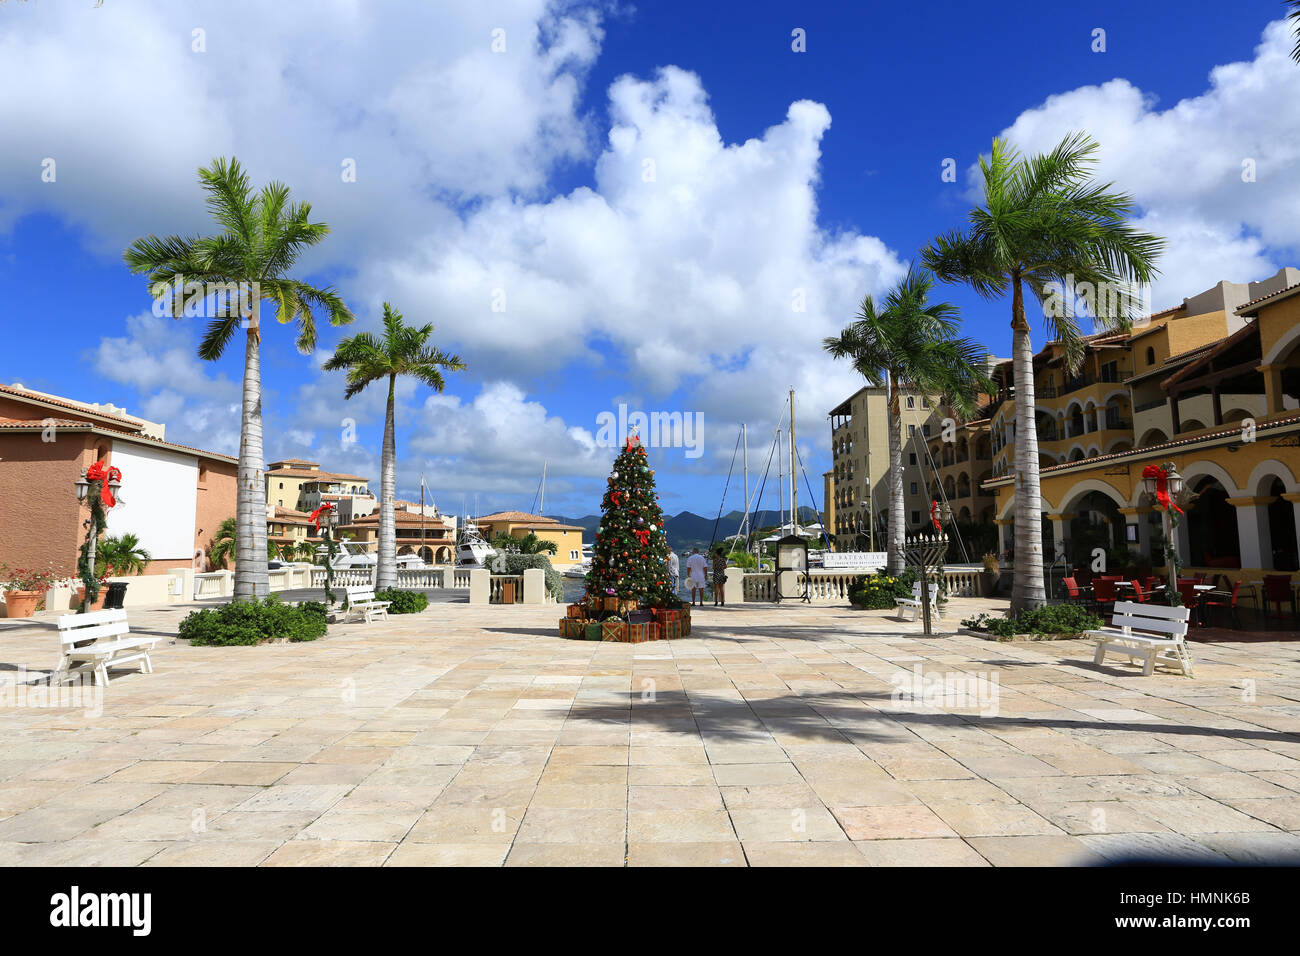 The Porto Cupecoy Village Plaza with boutiques and restaurants on the Caribbean Island of Sint Maarten offering a Riviera lifestyle with condos and ya Stock Photo